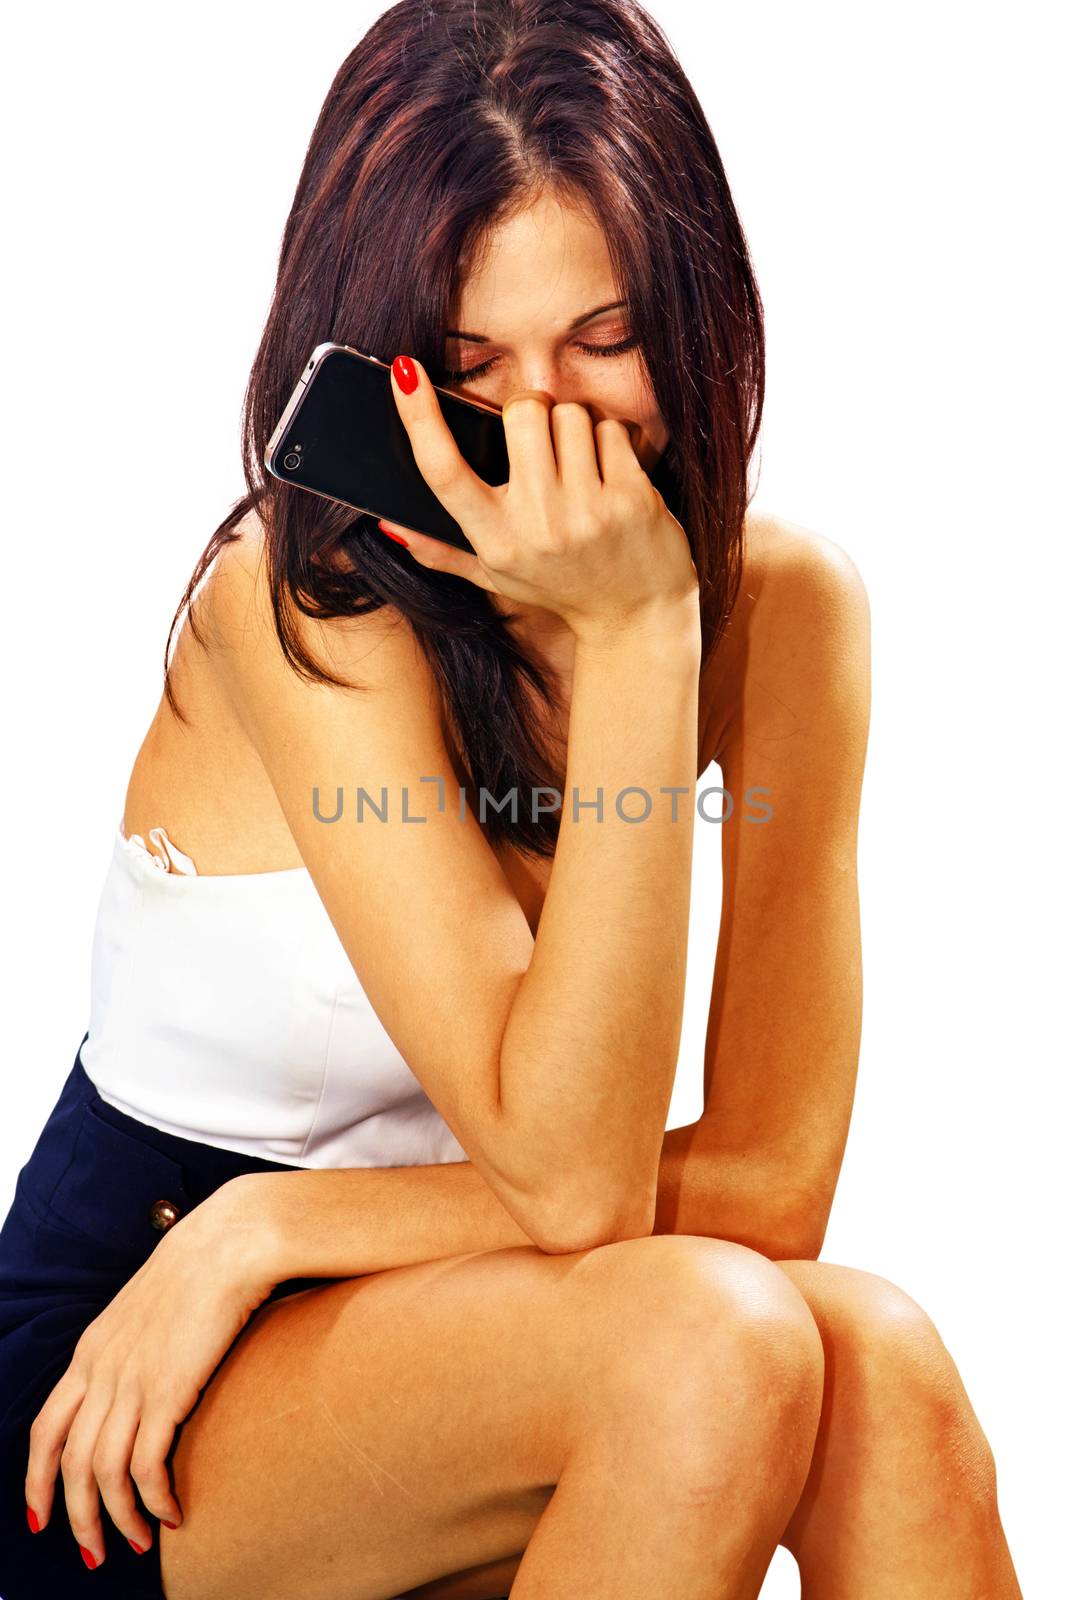 Sad young woman with smart phone isolated on white background